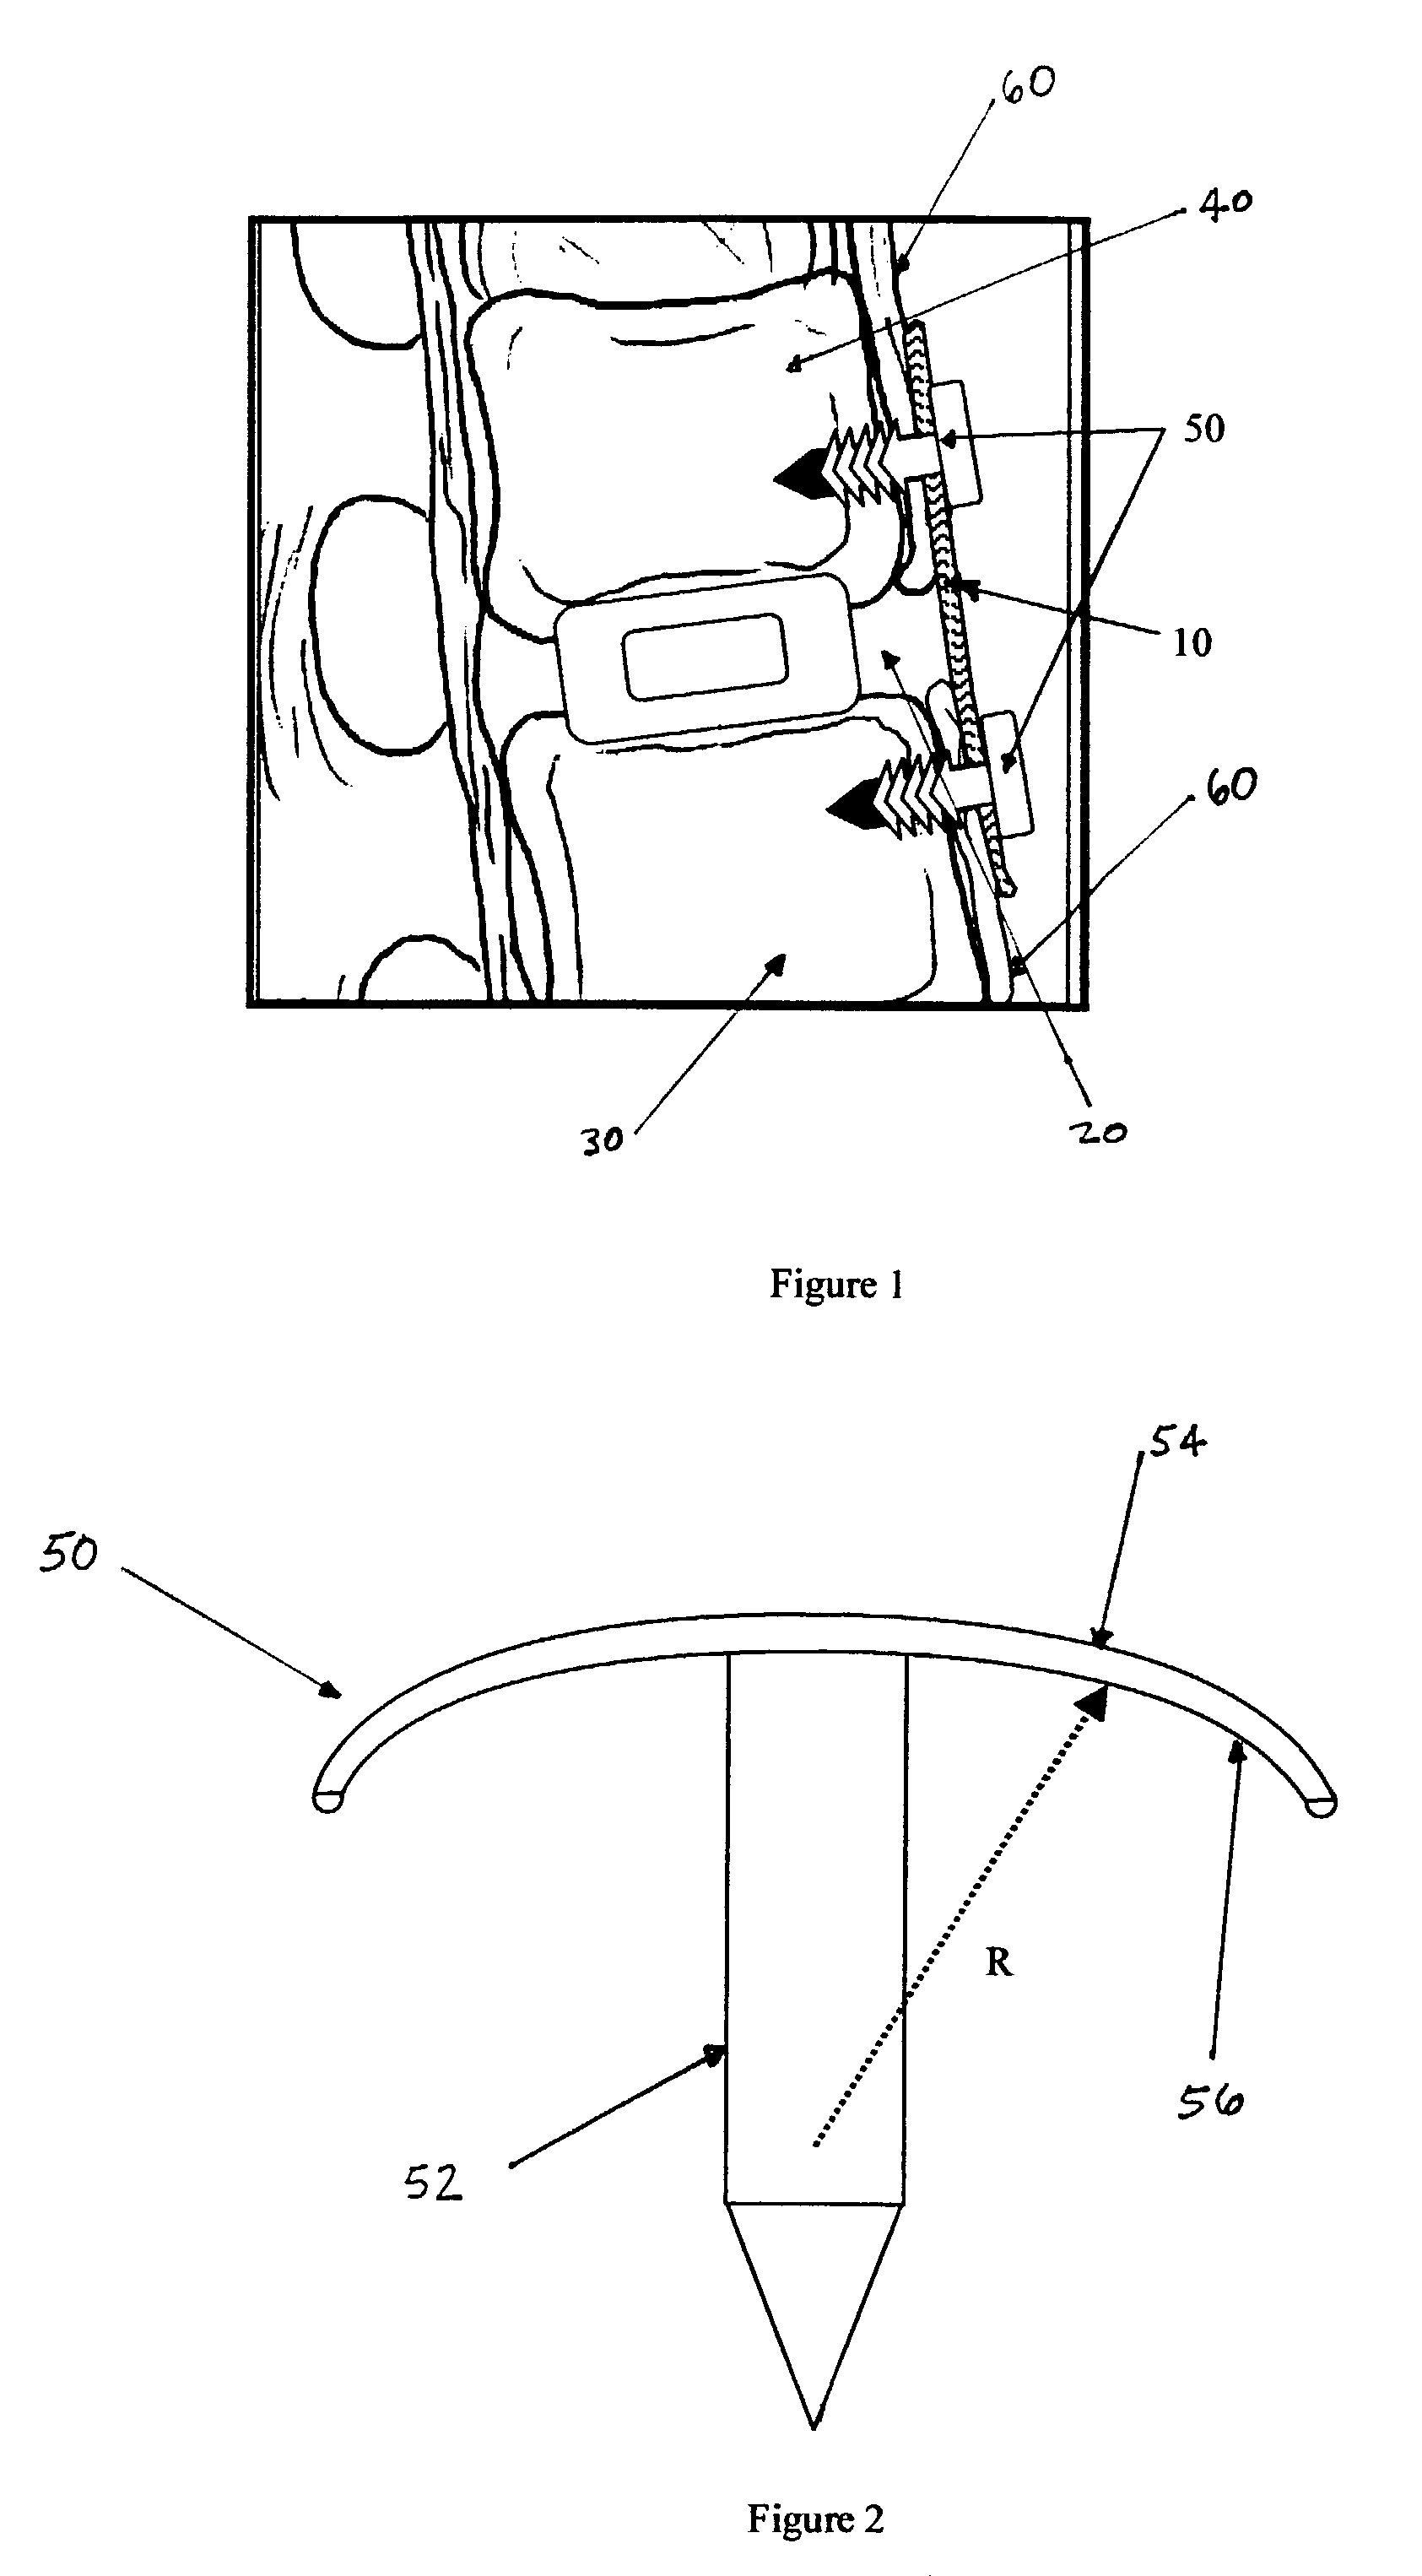 Regenerative implants for stabilizing the spine and devices for attachment of said implants